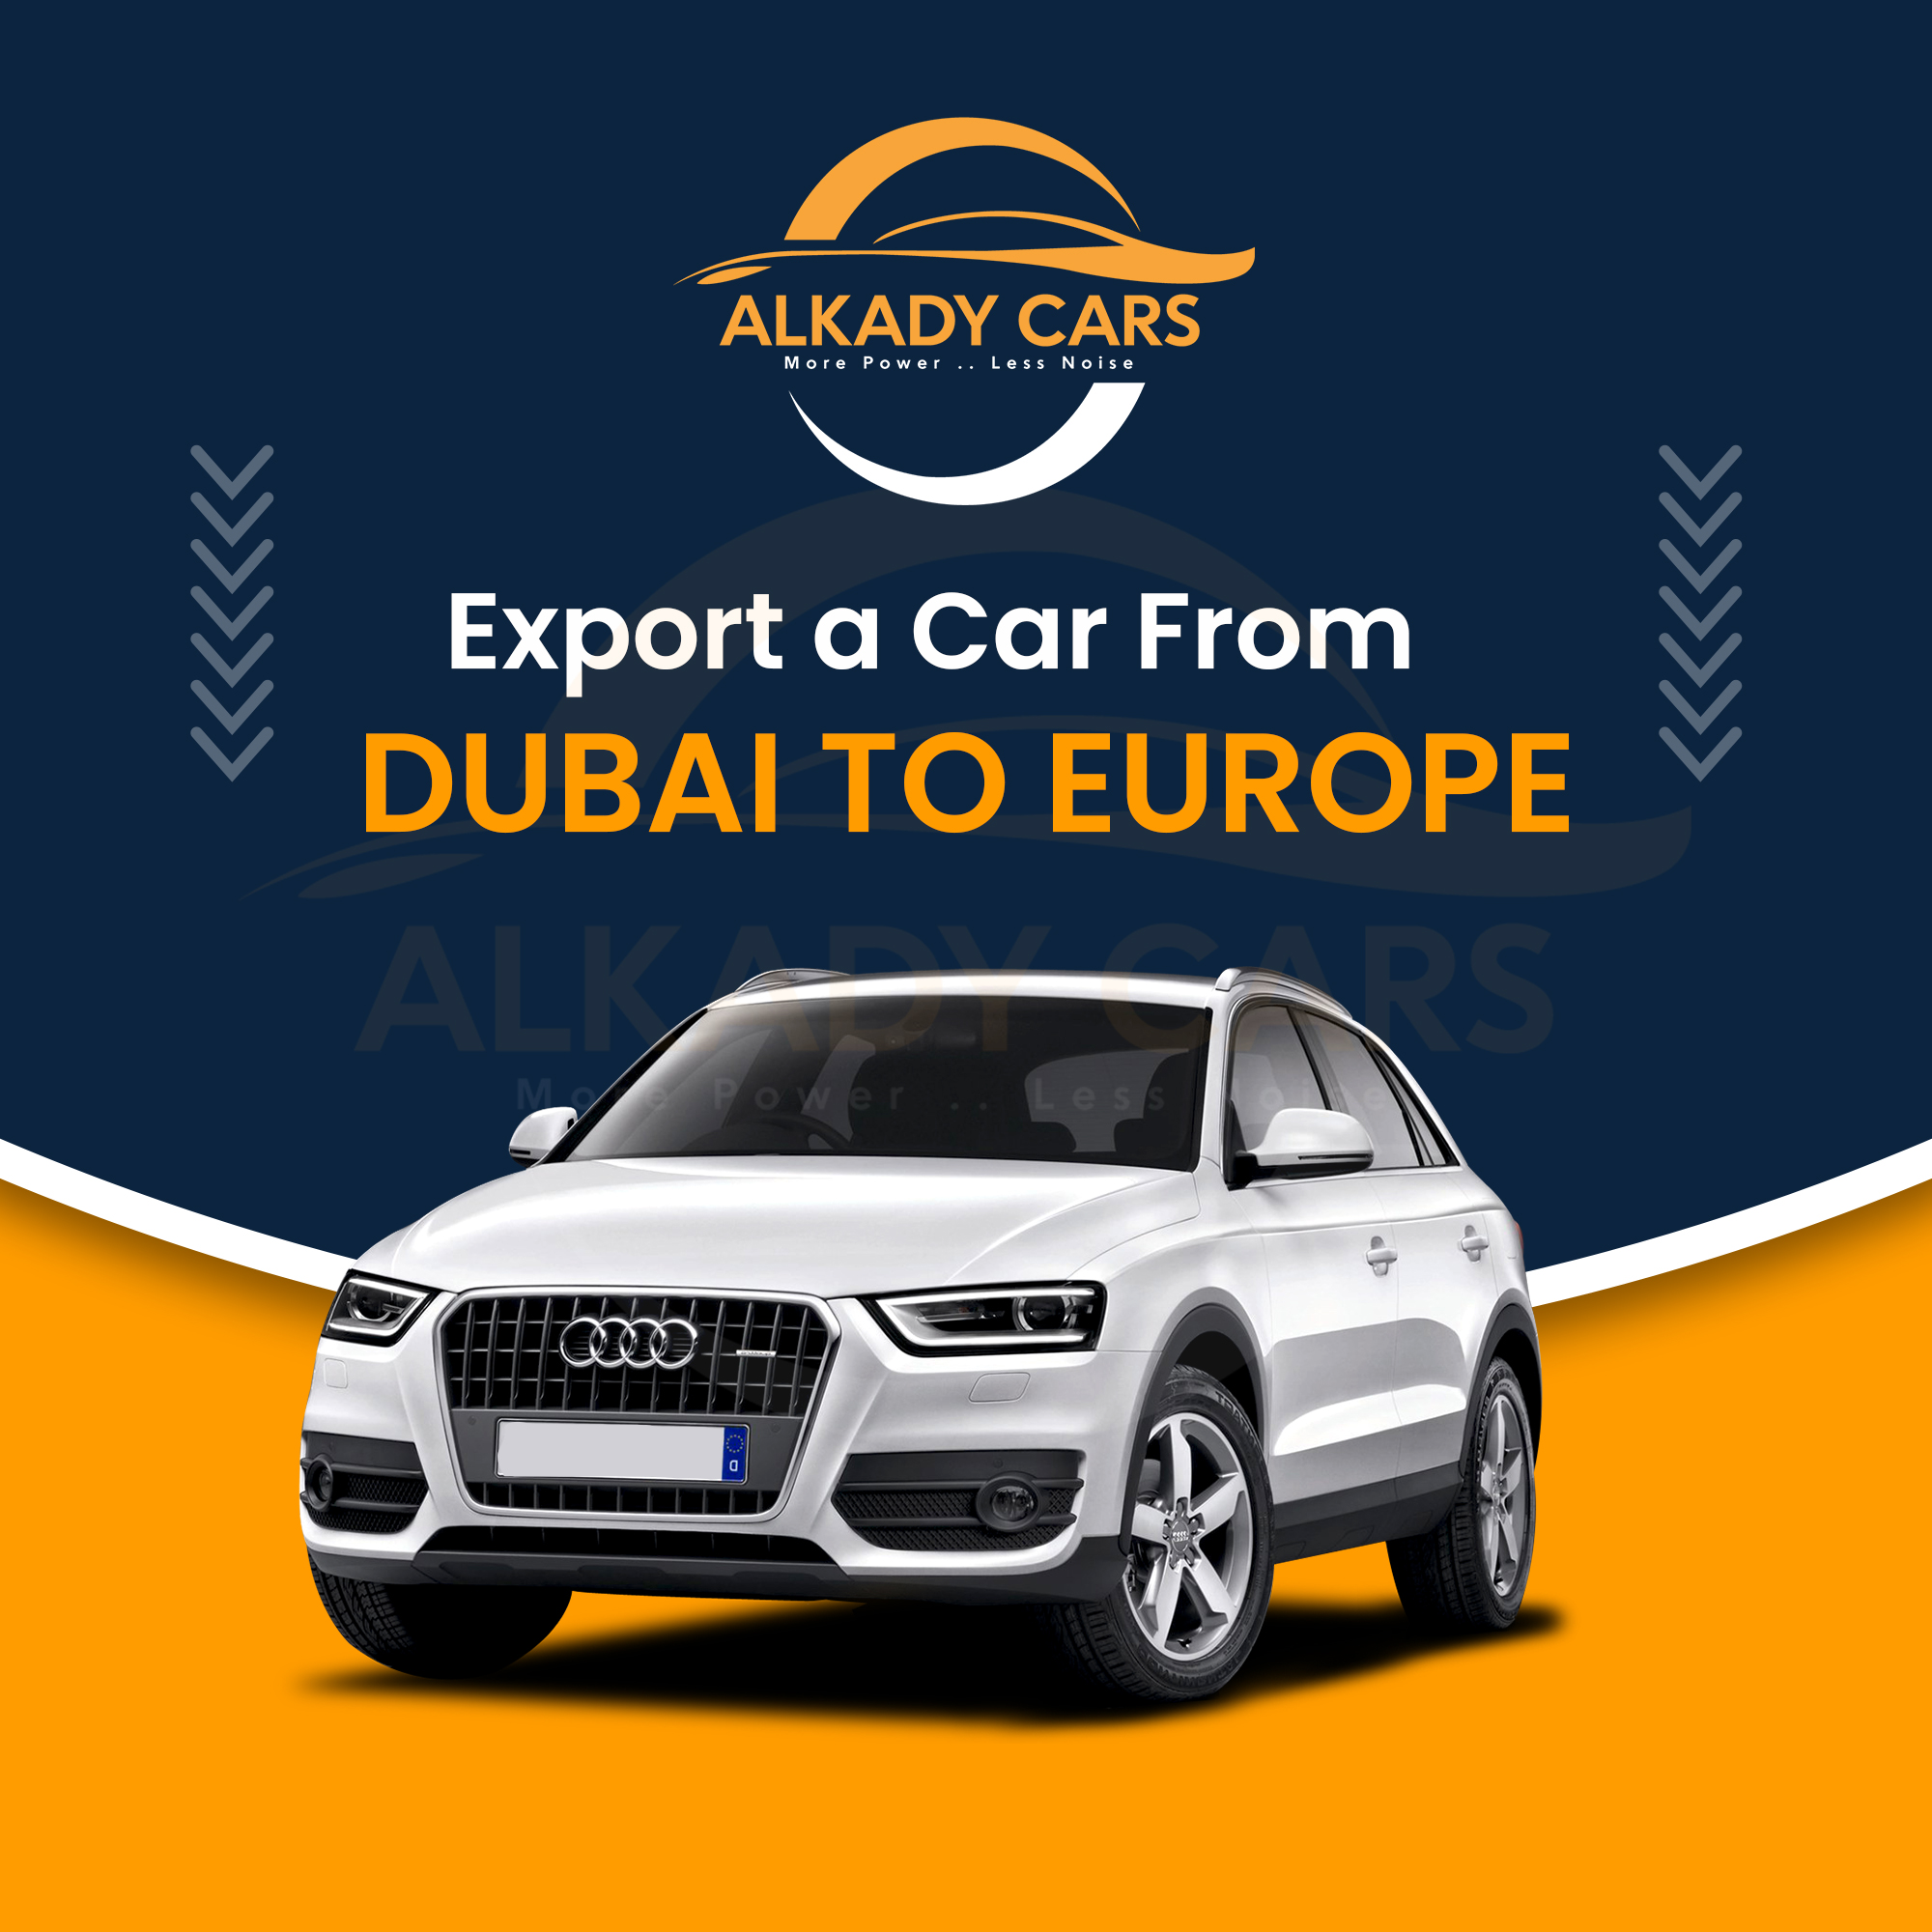 Export a Car from Dubai to Europe